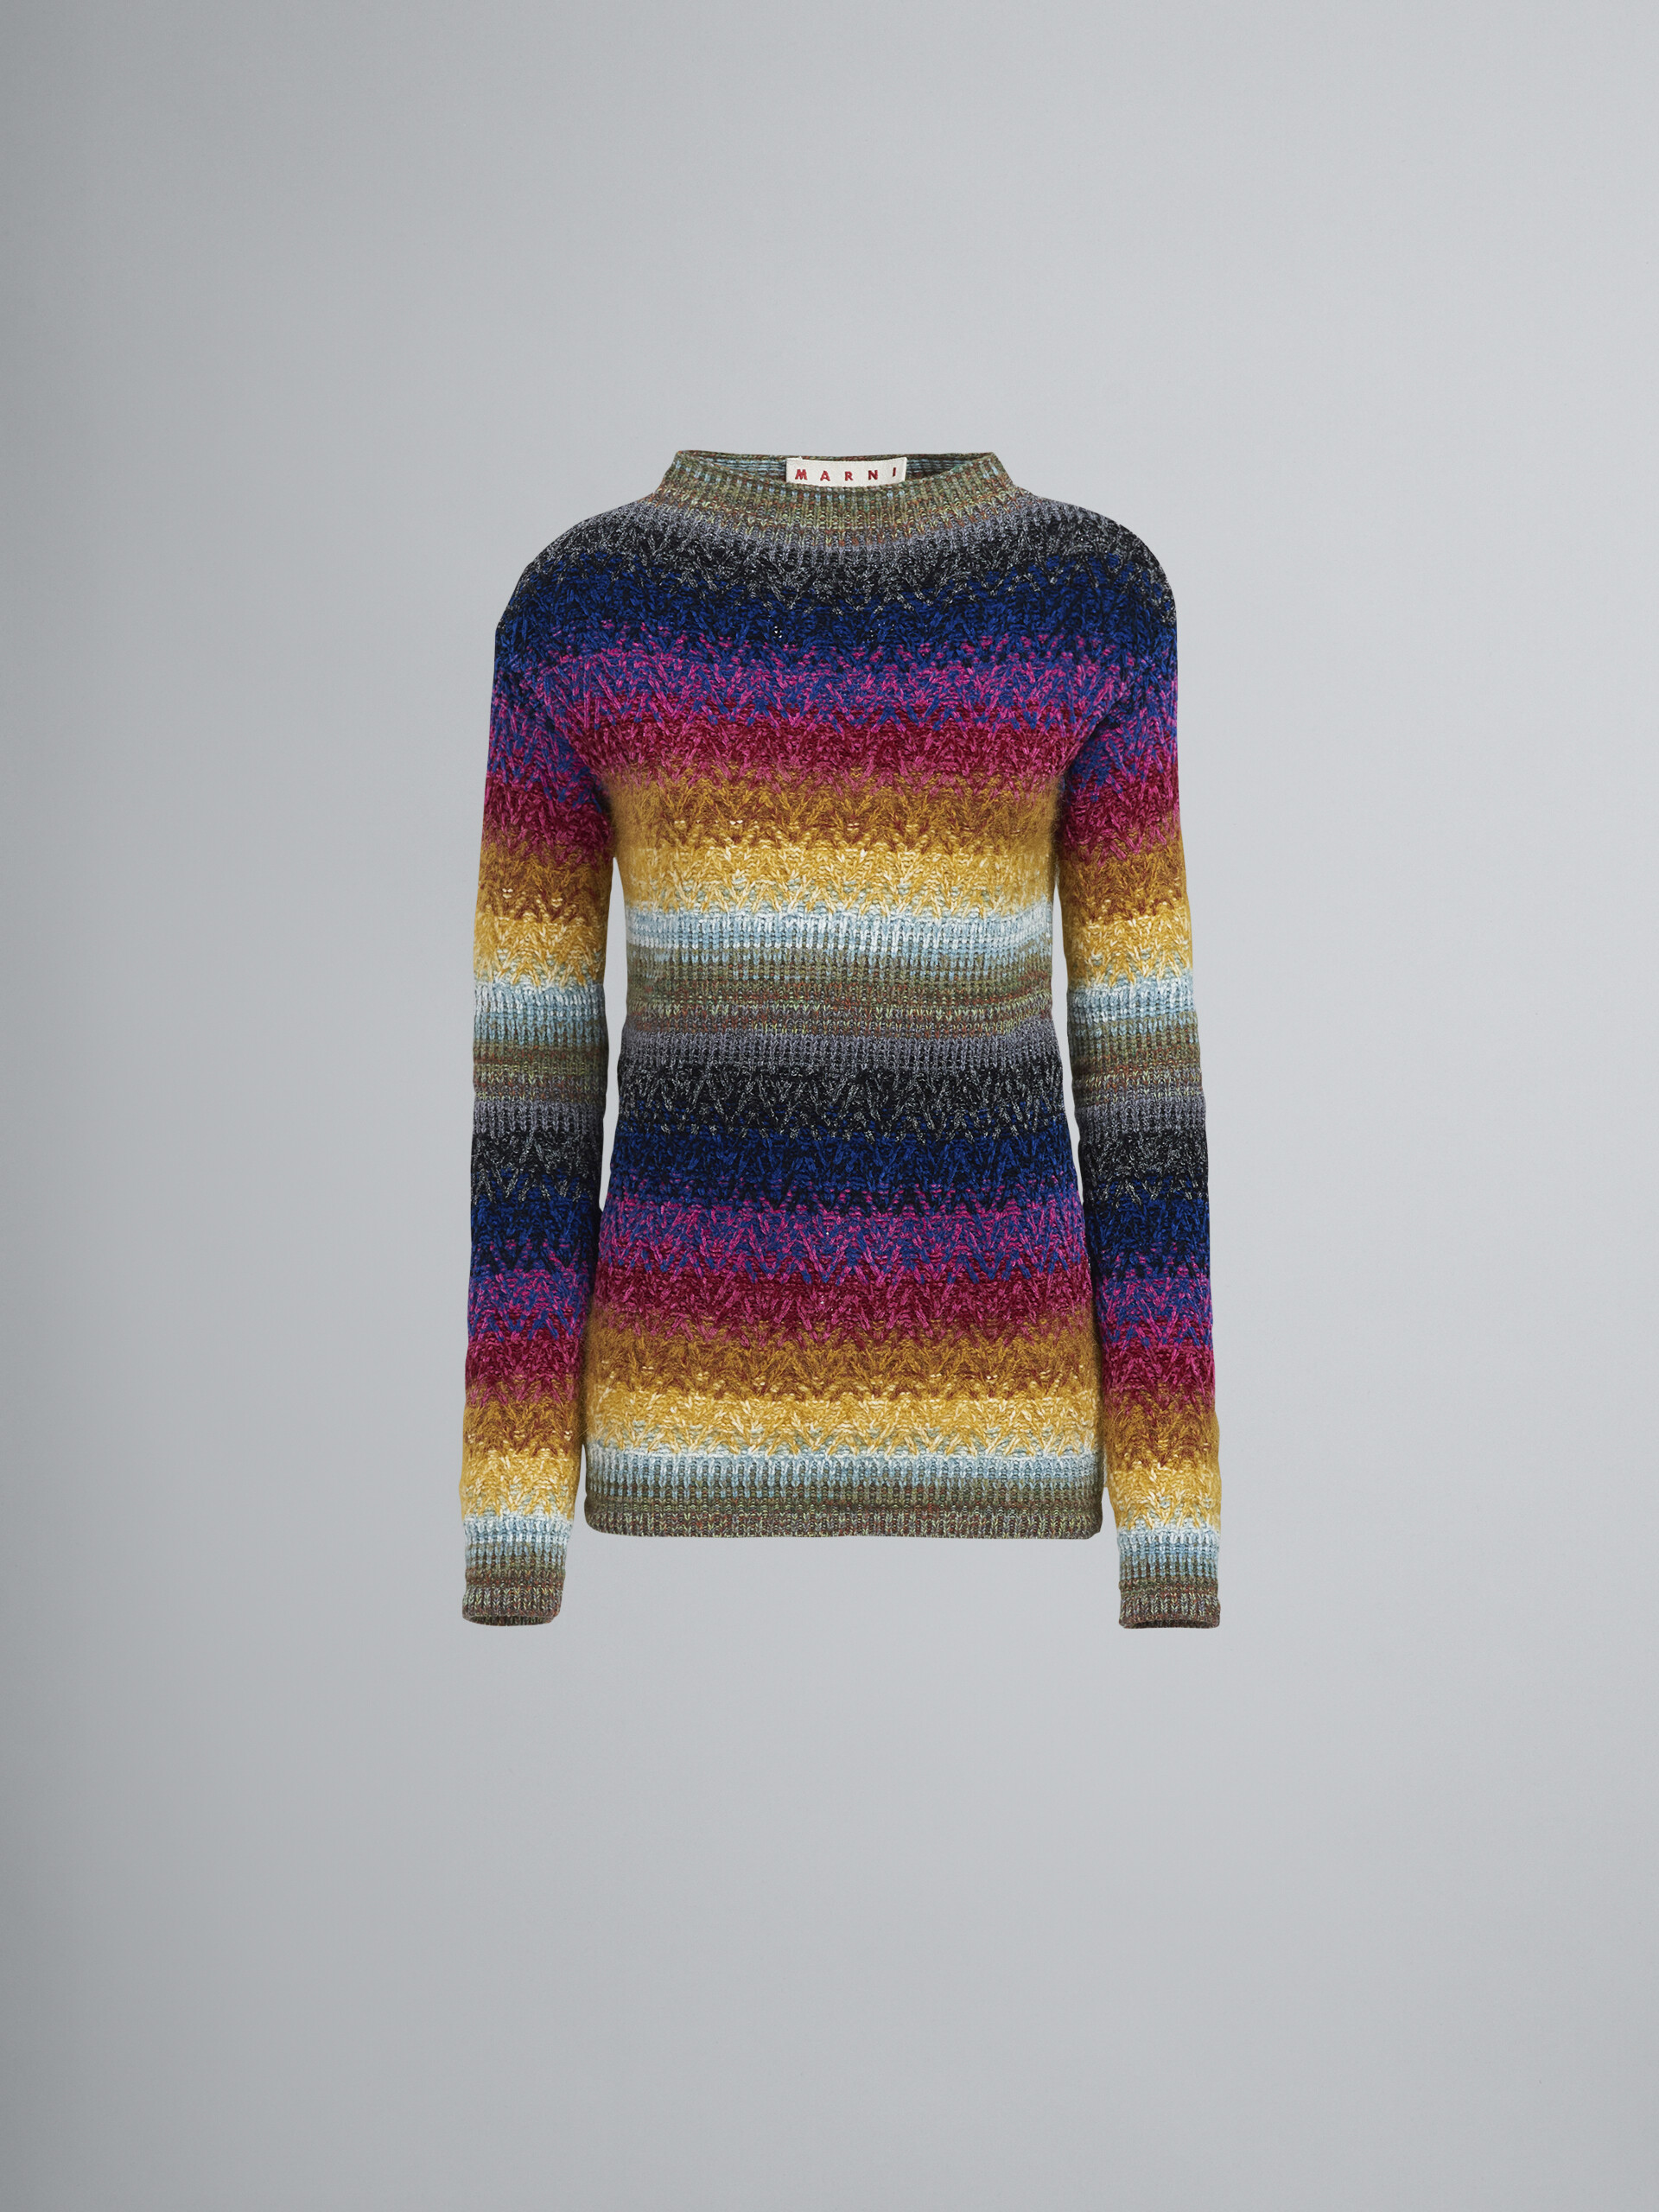 Viscose cotton and wool sweater - Pullovers - Image 1